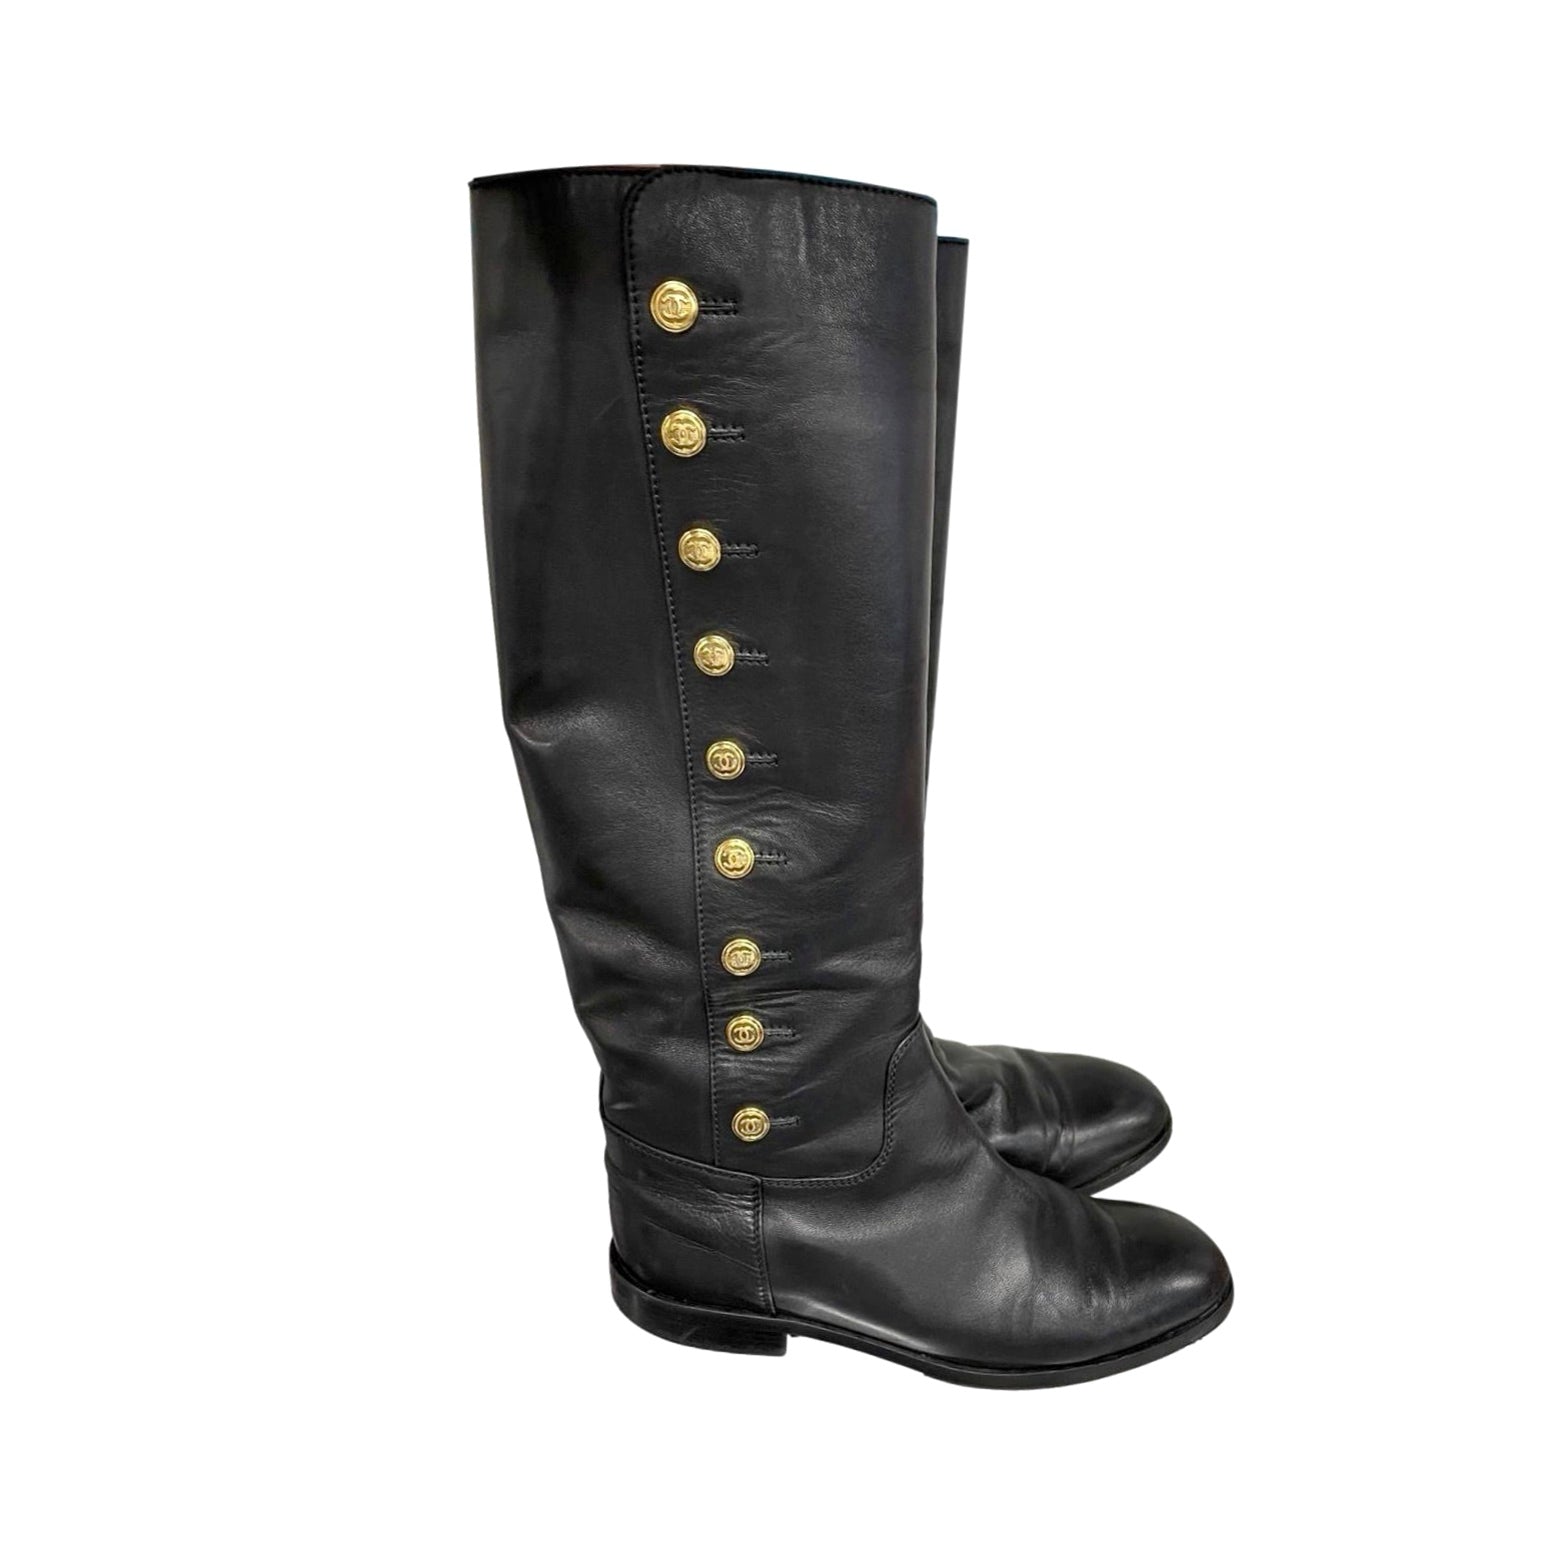 chanel shoes boots women